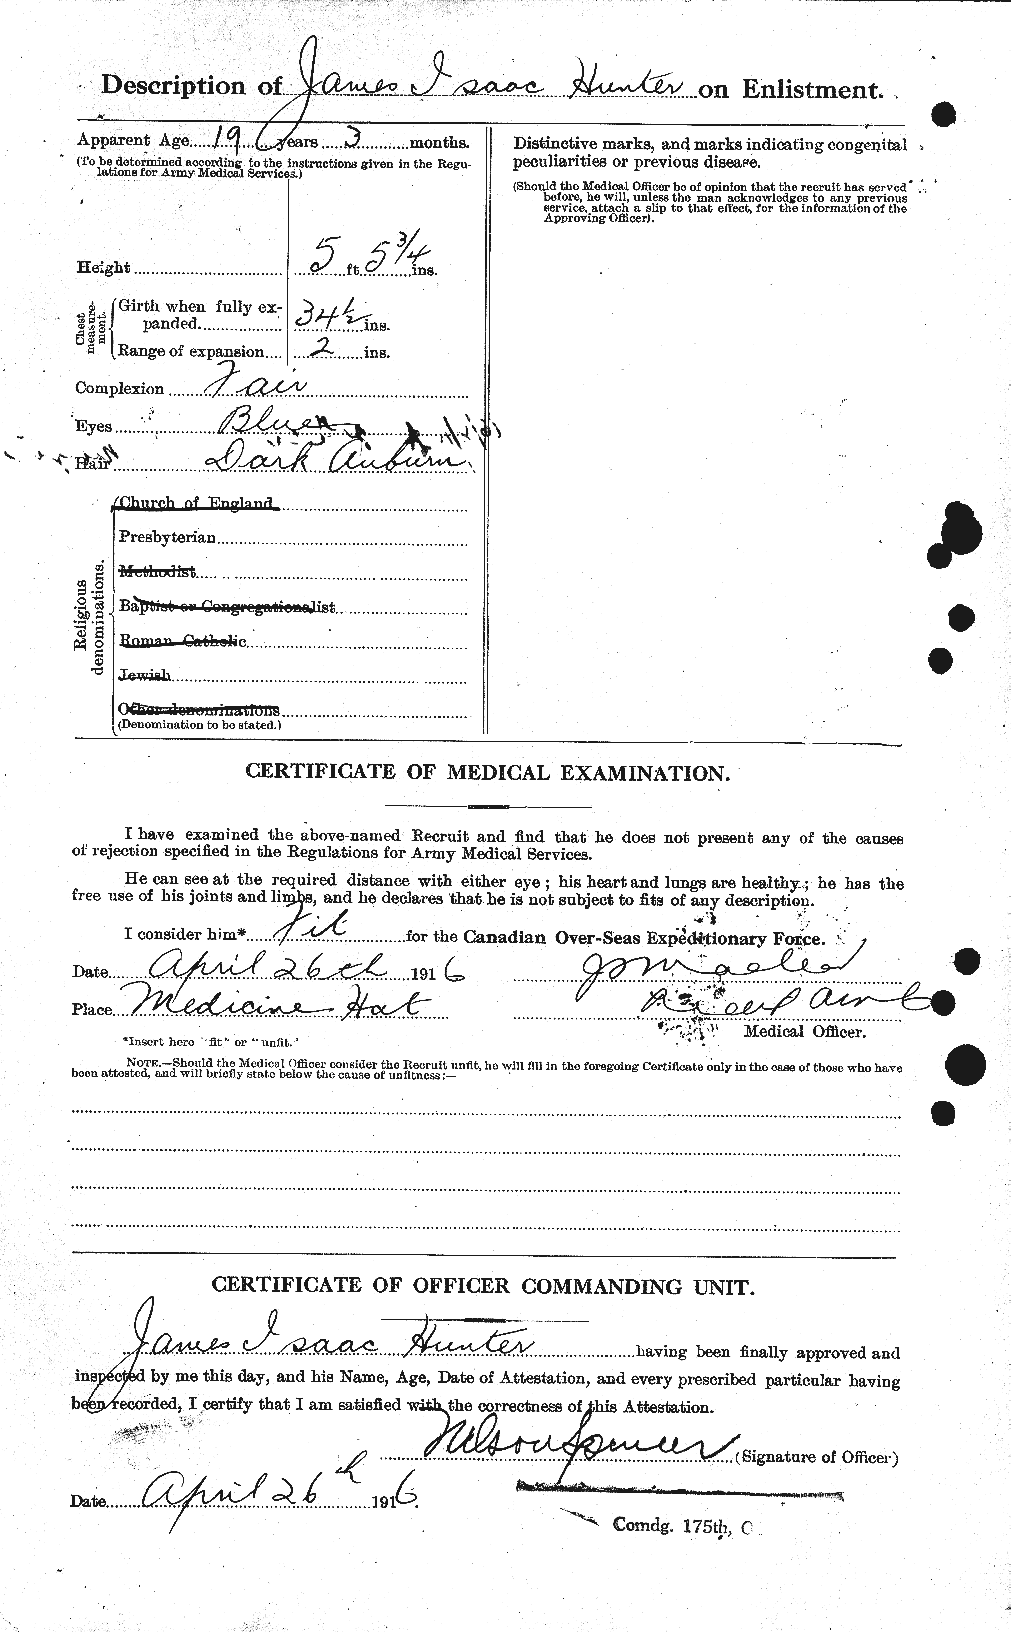 Personnel Records of the First World War - CEF 410296b